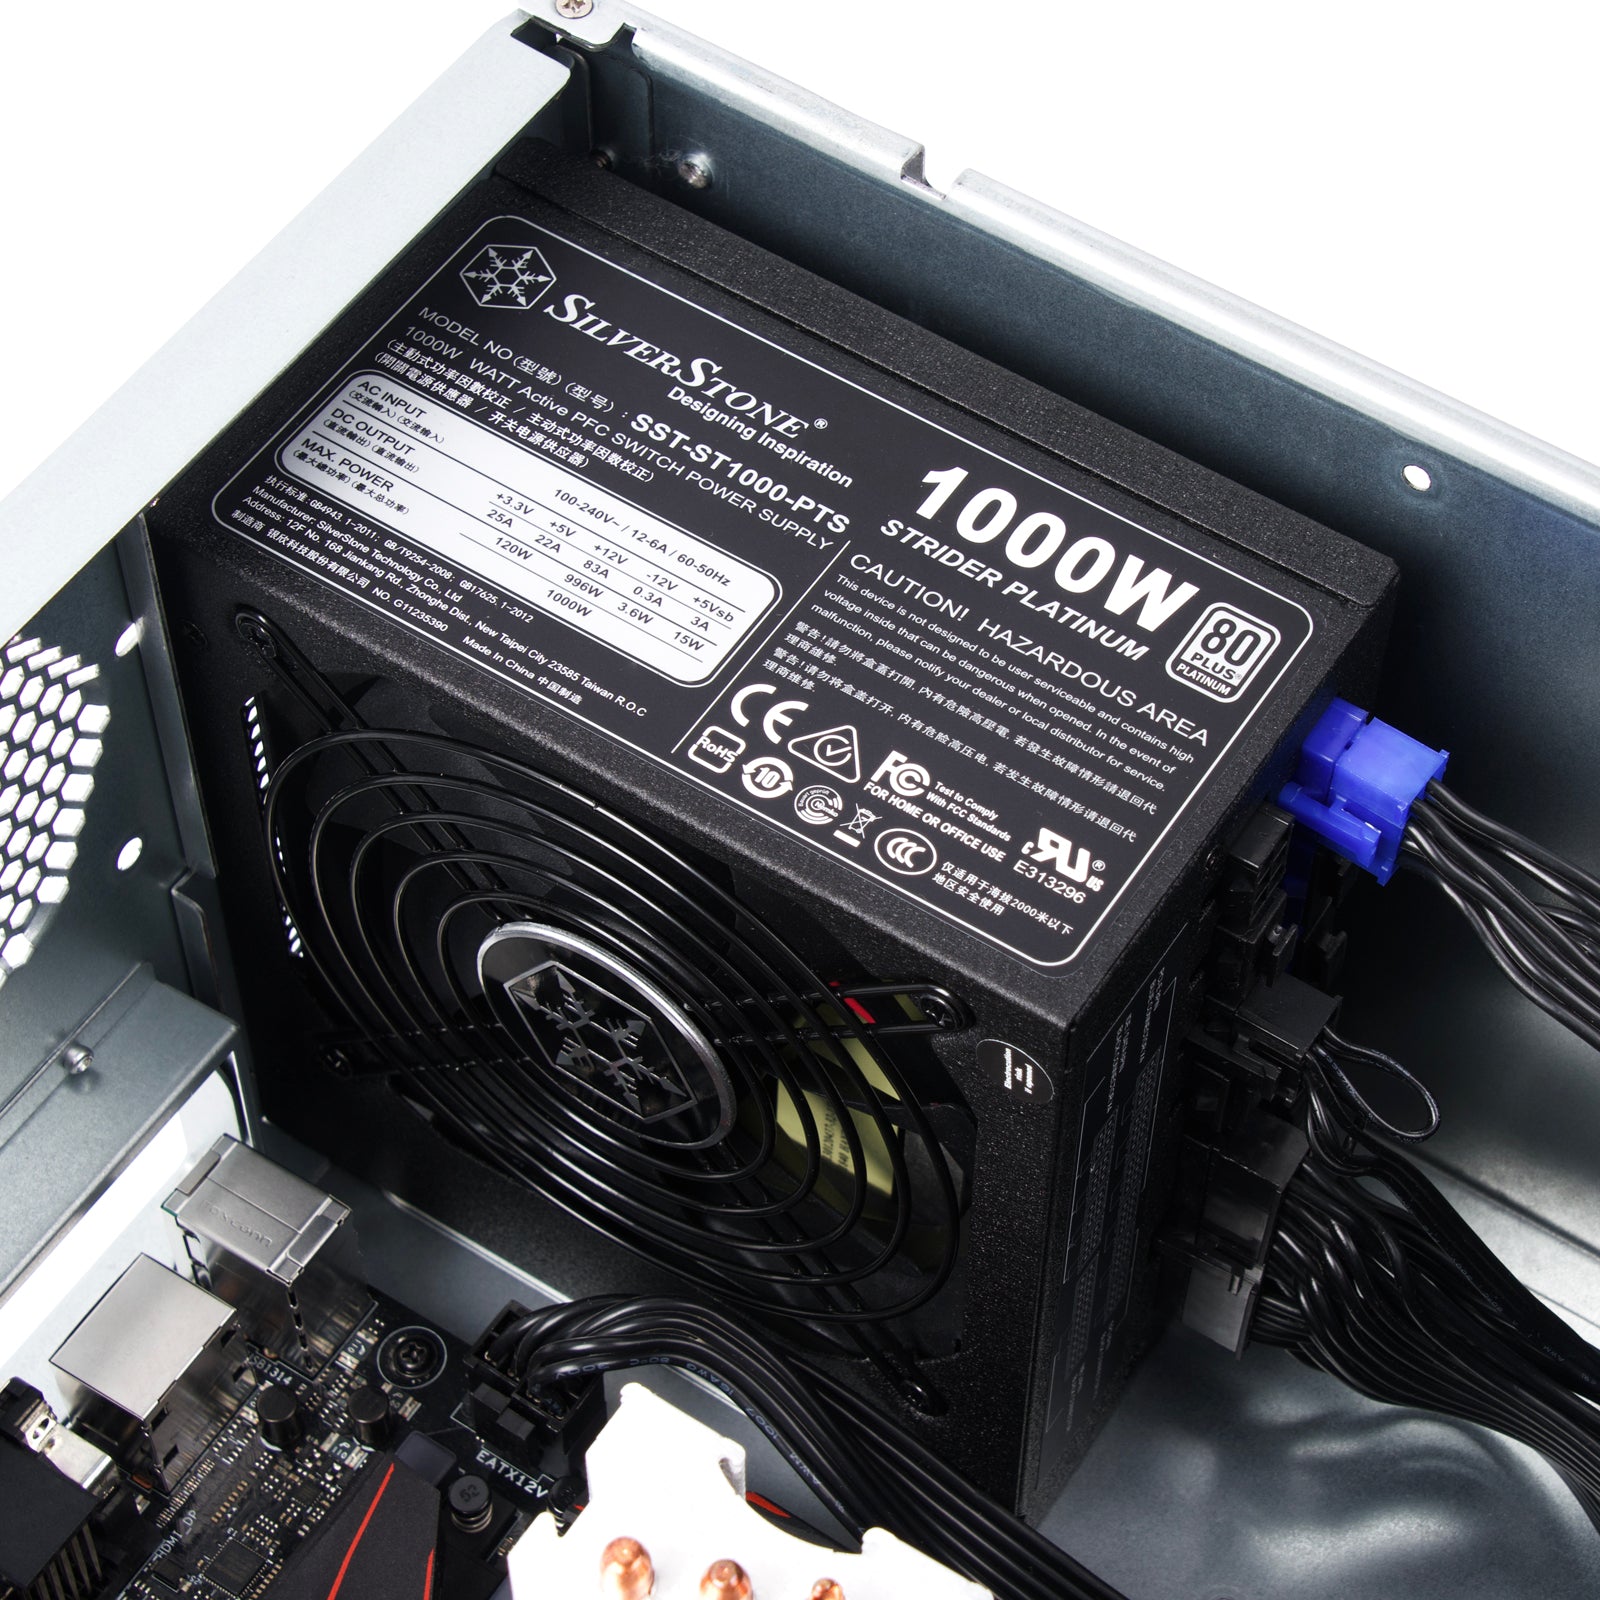 SilverStone RM41-H08 4U form factor 5 x 3.5” Hot-swappable and 3 x 5.25" server chassis